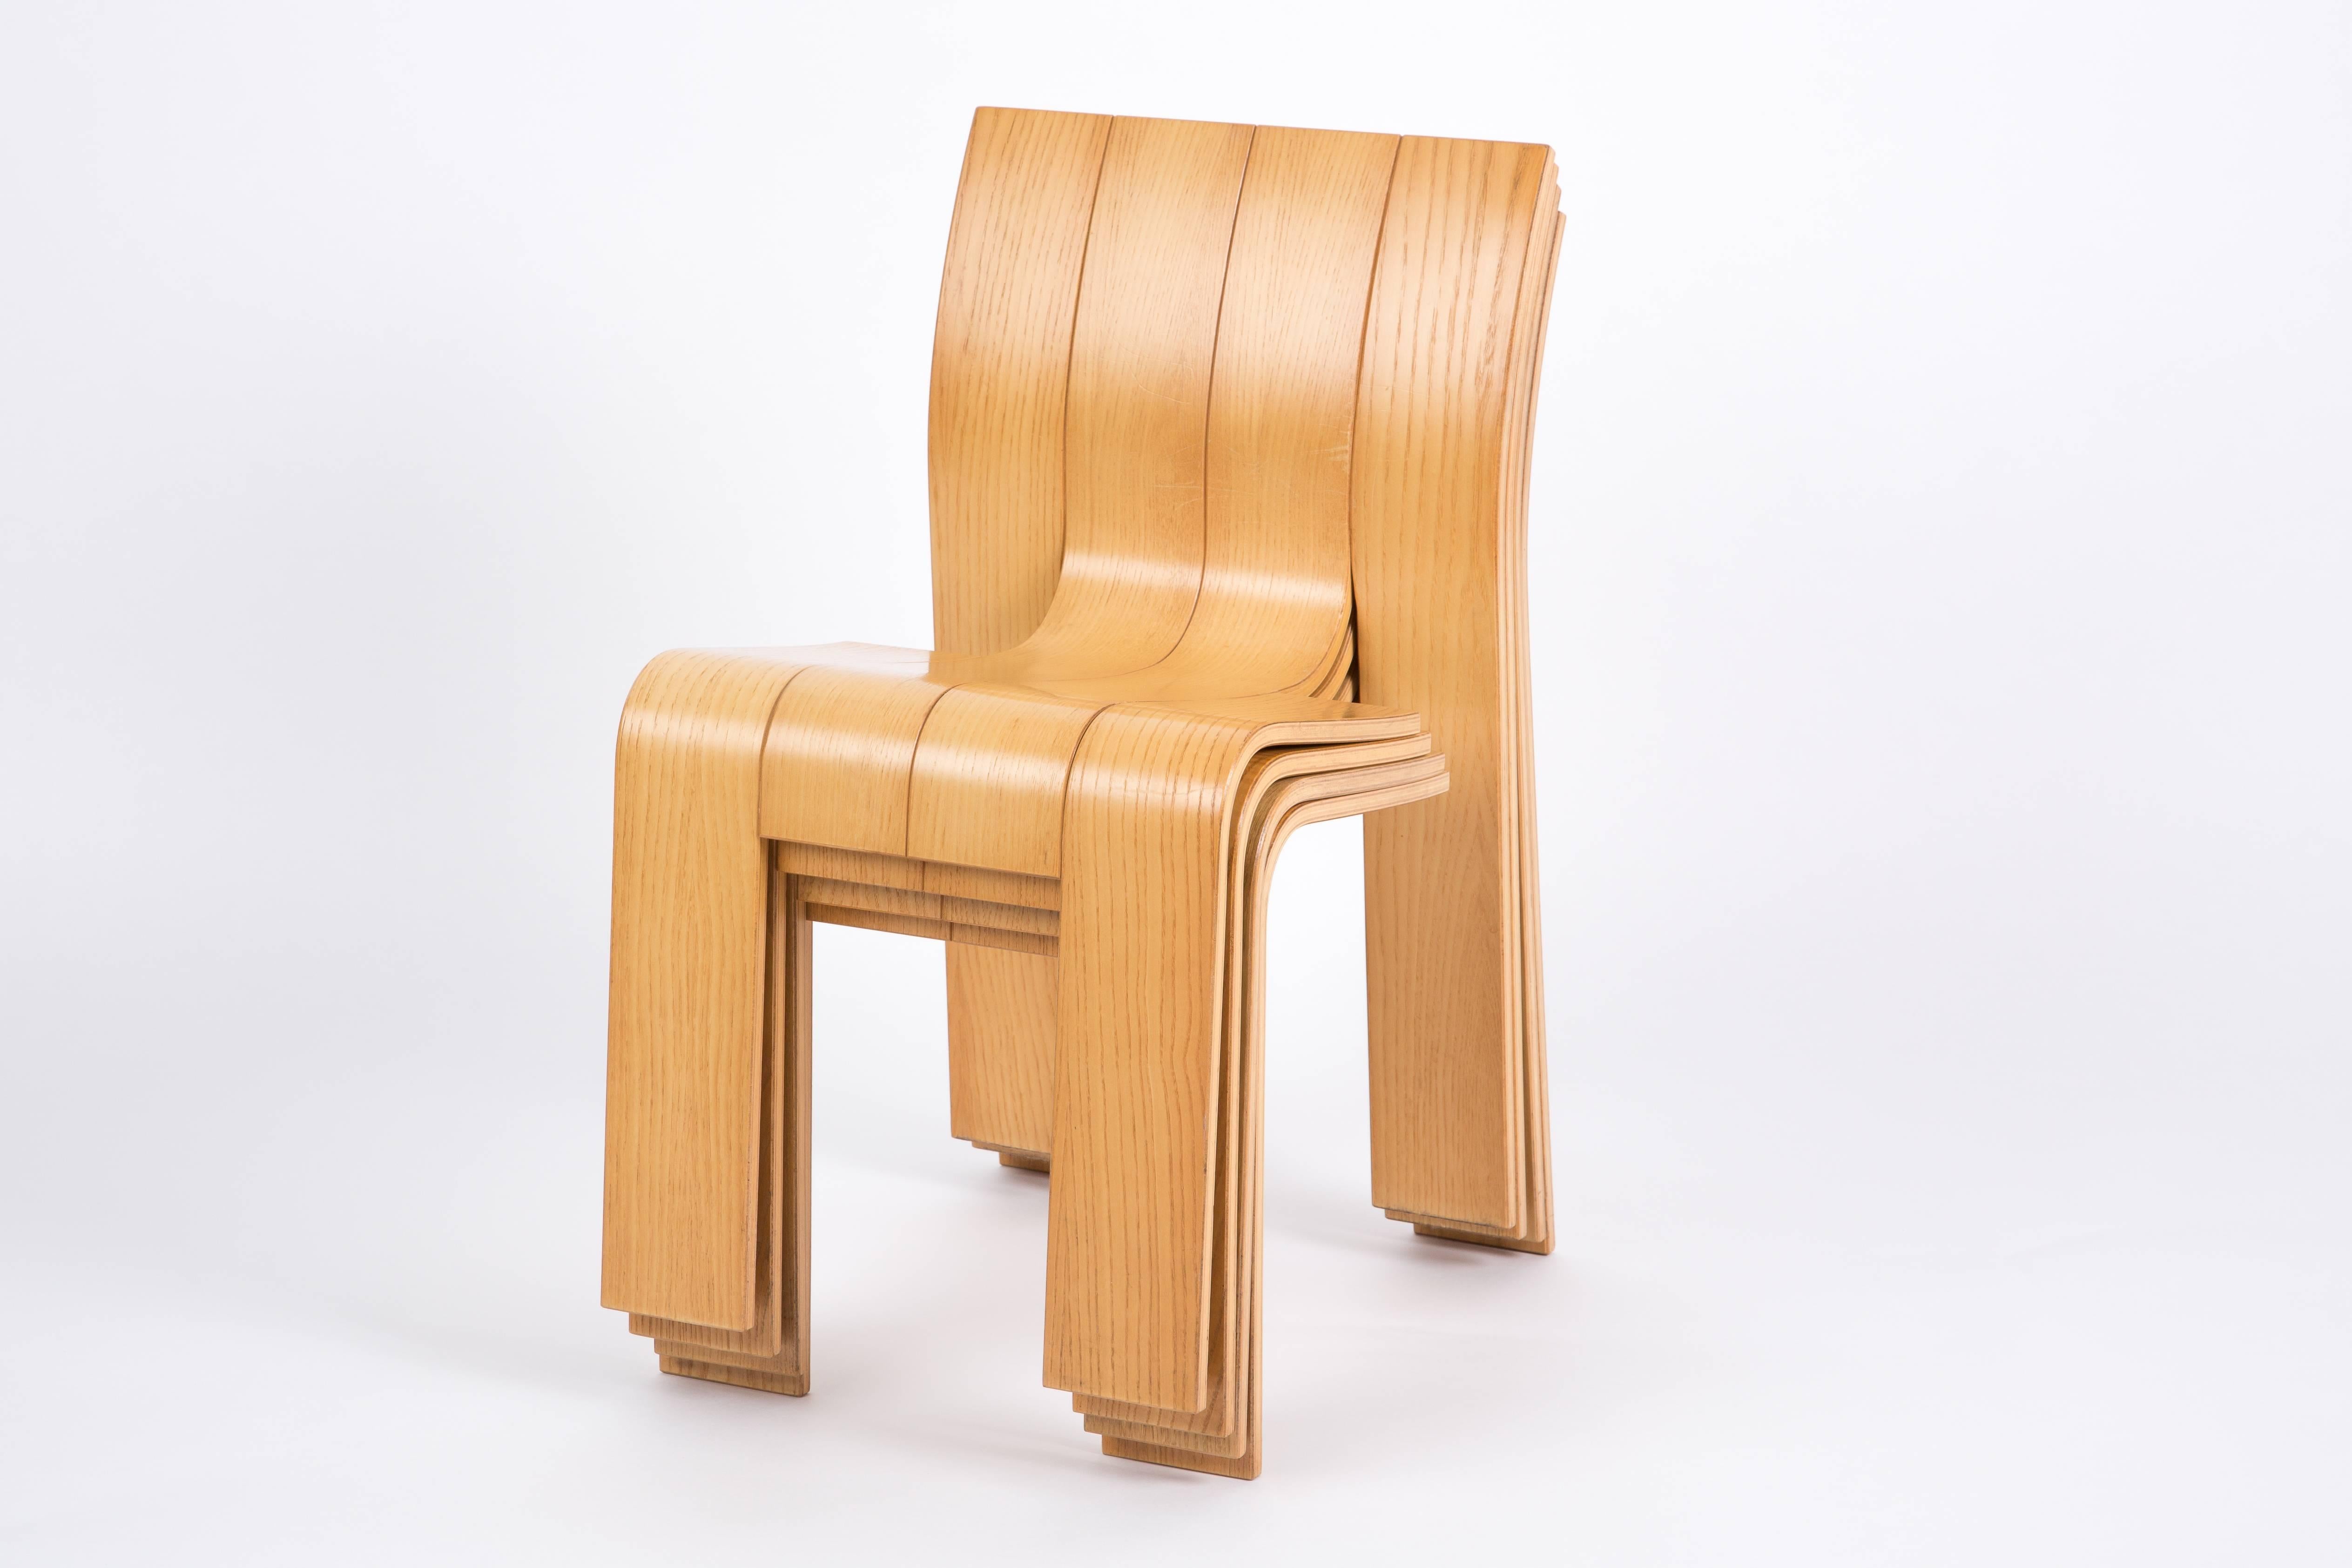 GIJS BAKKER STRIP CHAIRS with the strip table 3